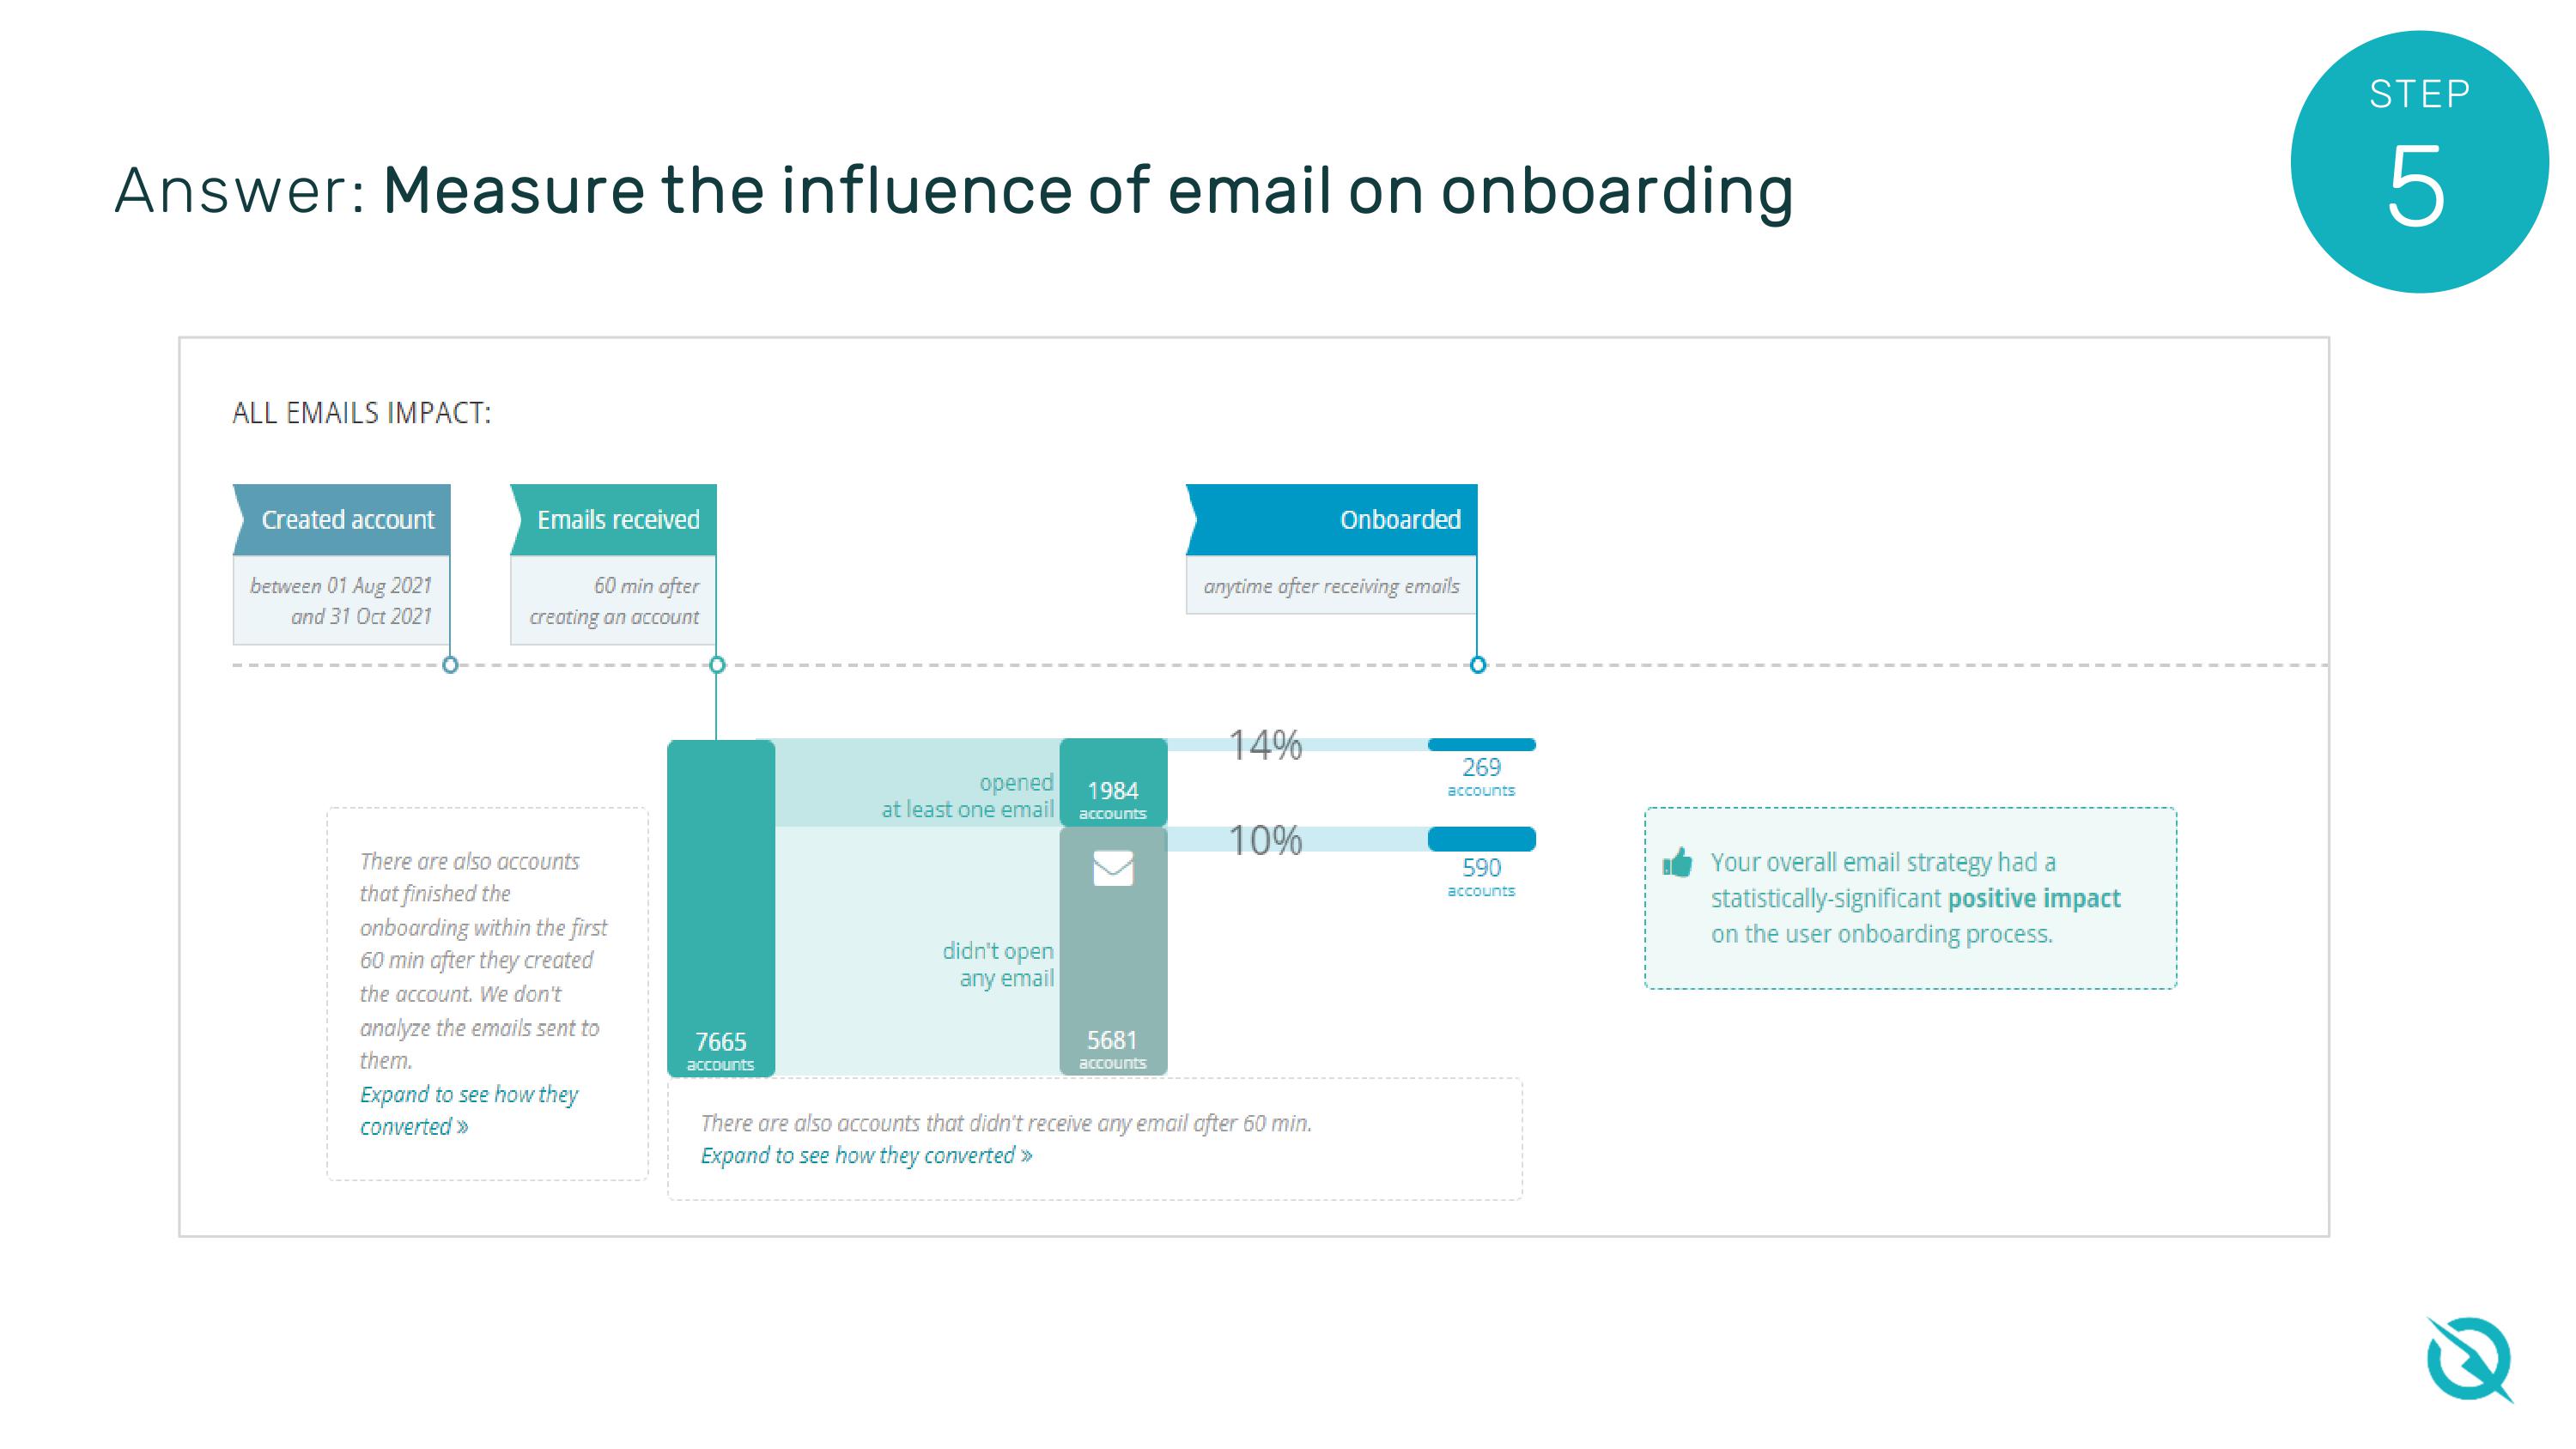 One Metric for User Onboarding: A graphical presentation of how emails have impacted the onboarding rate